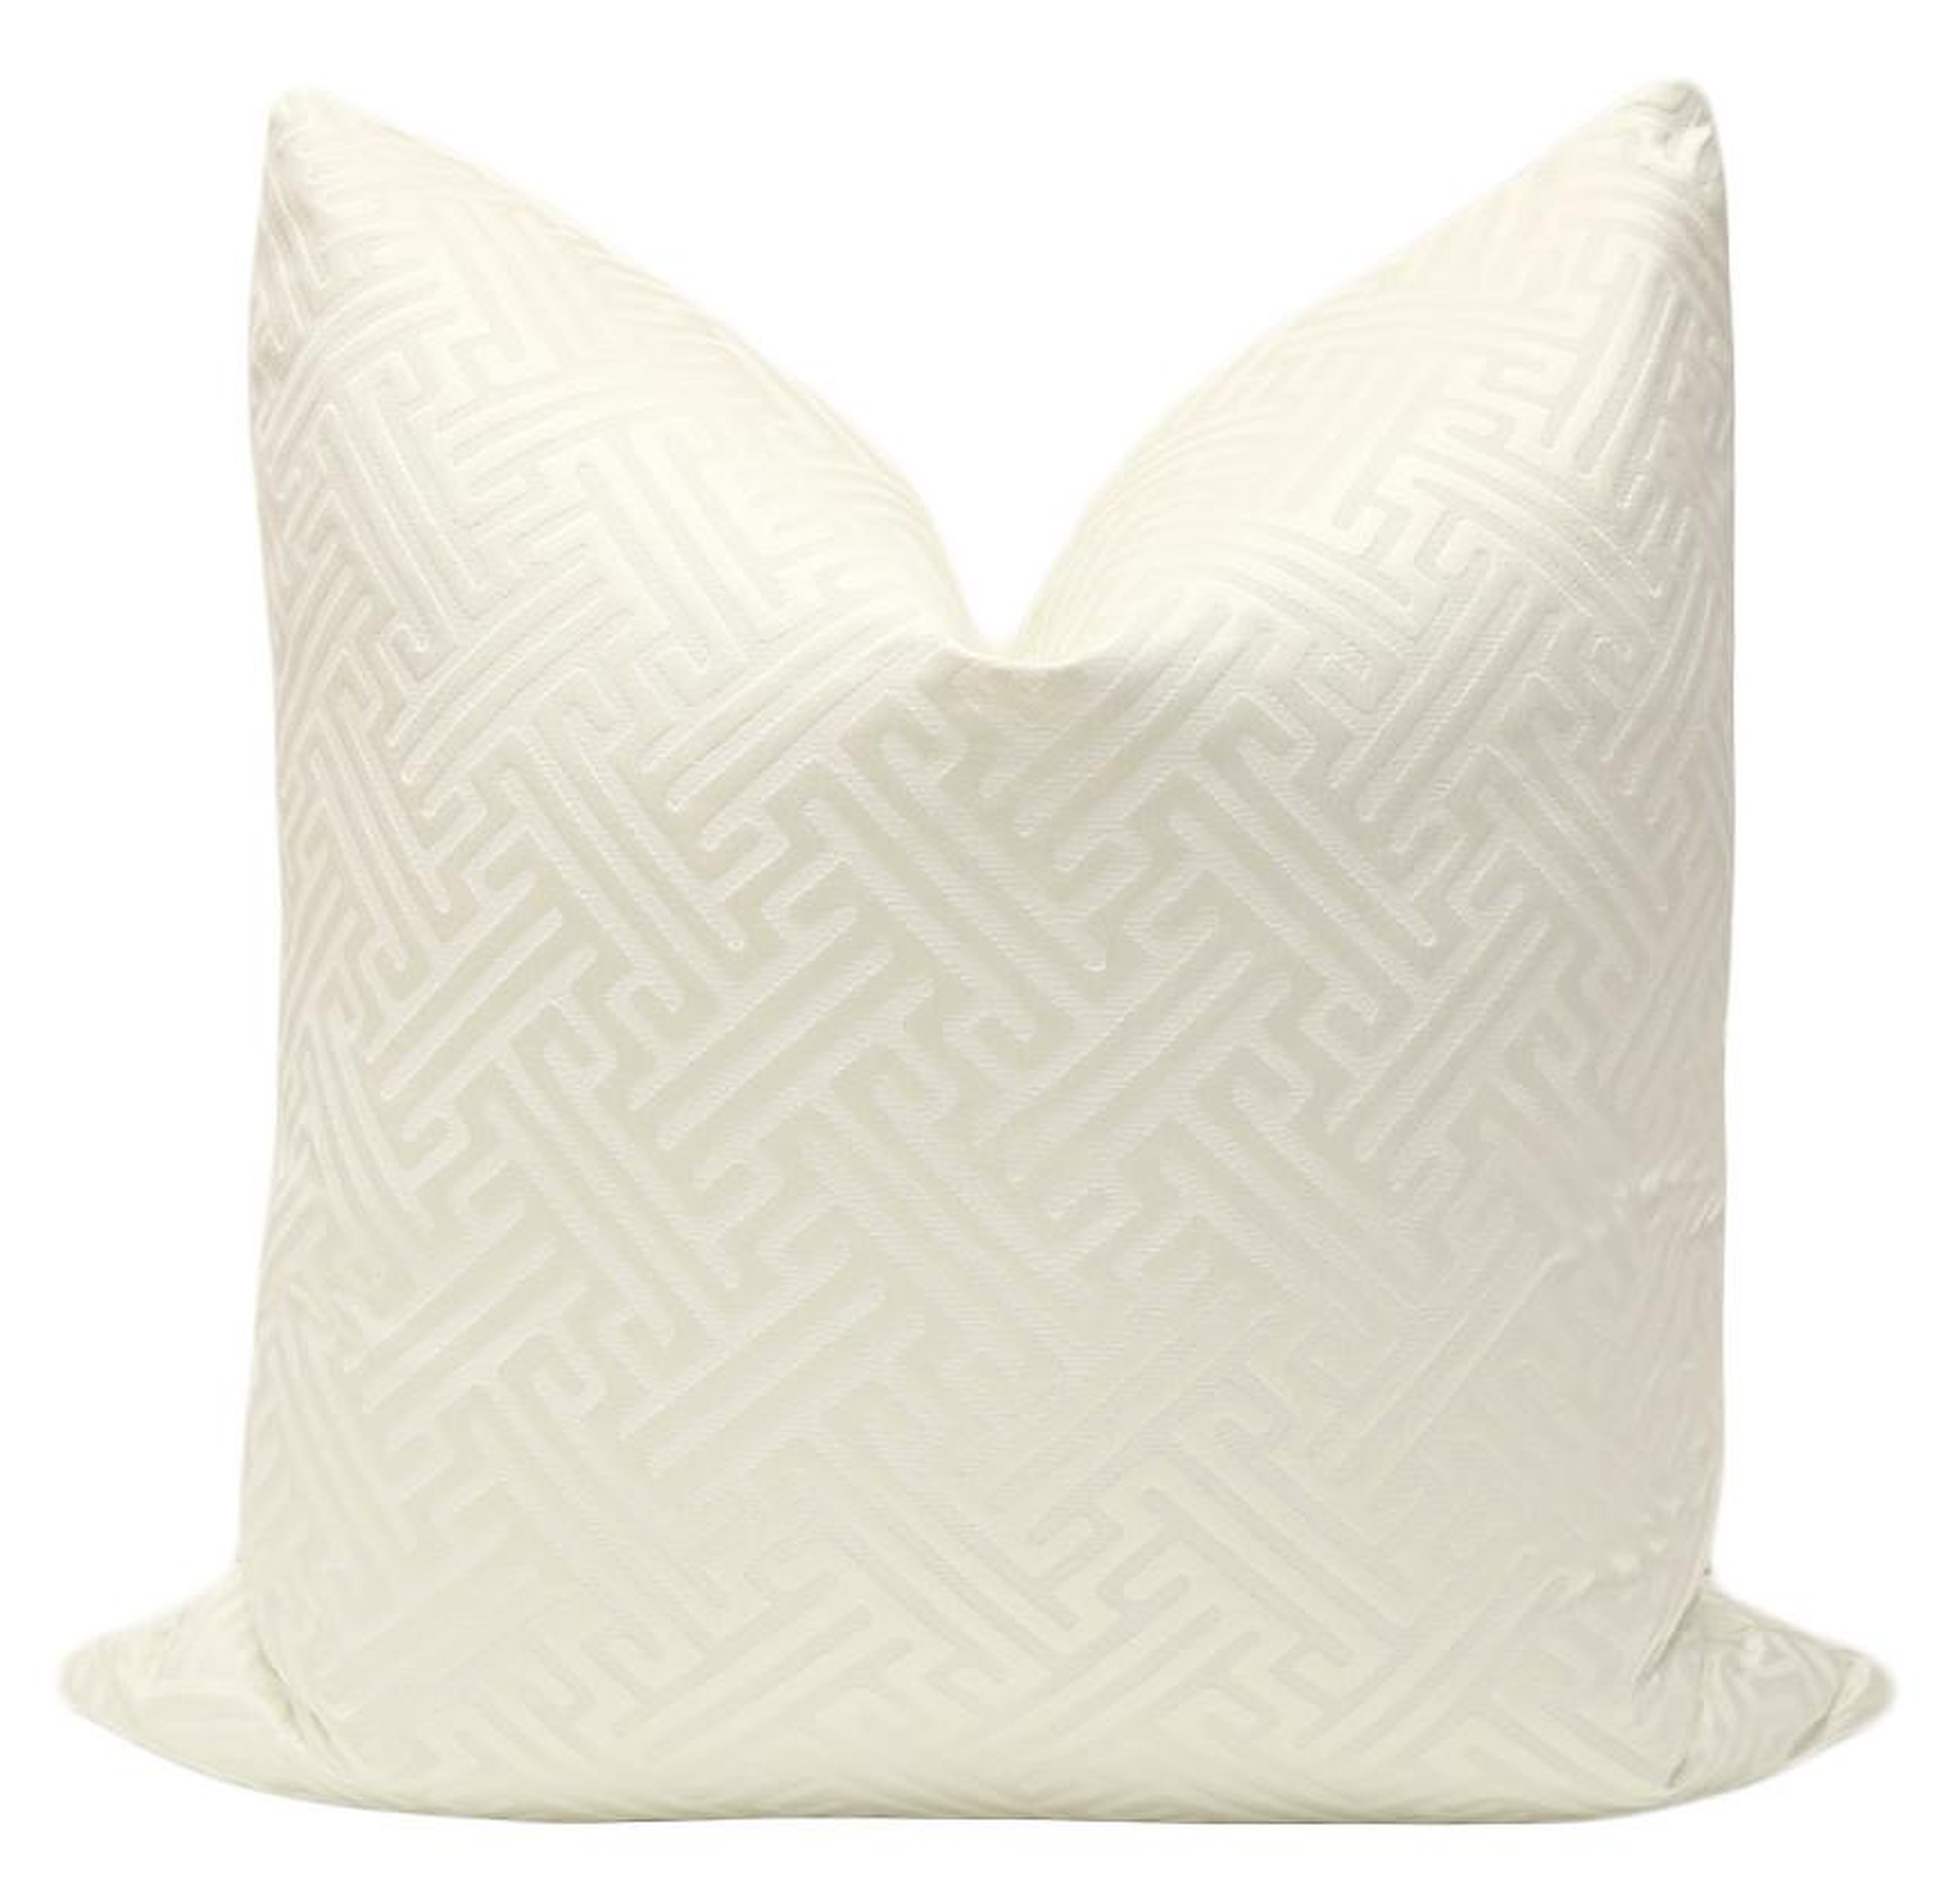 Grecian Key // Alabaster, 18" Pillow Cover - Little Design Company